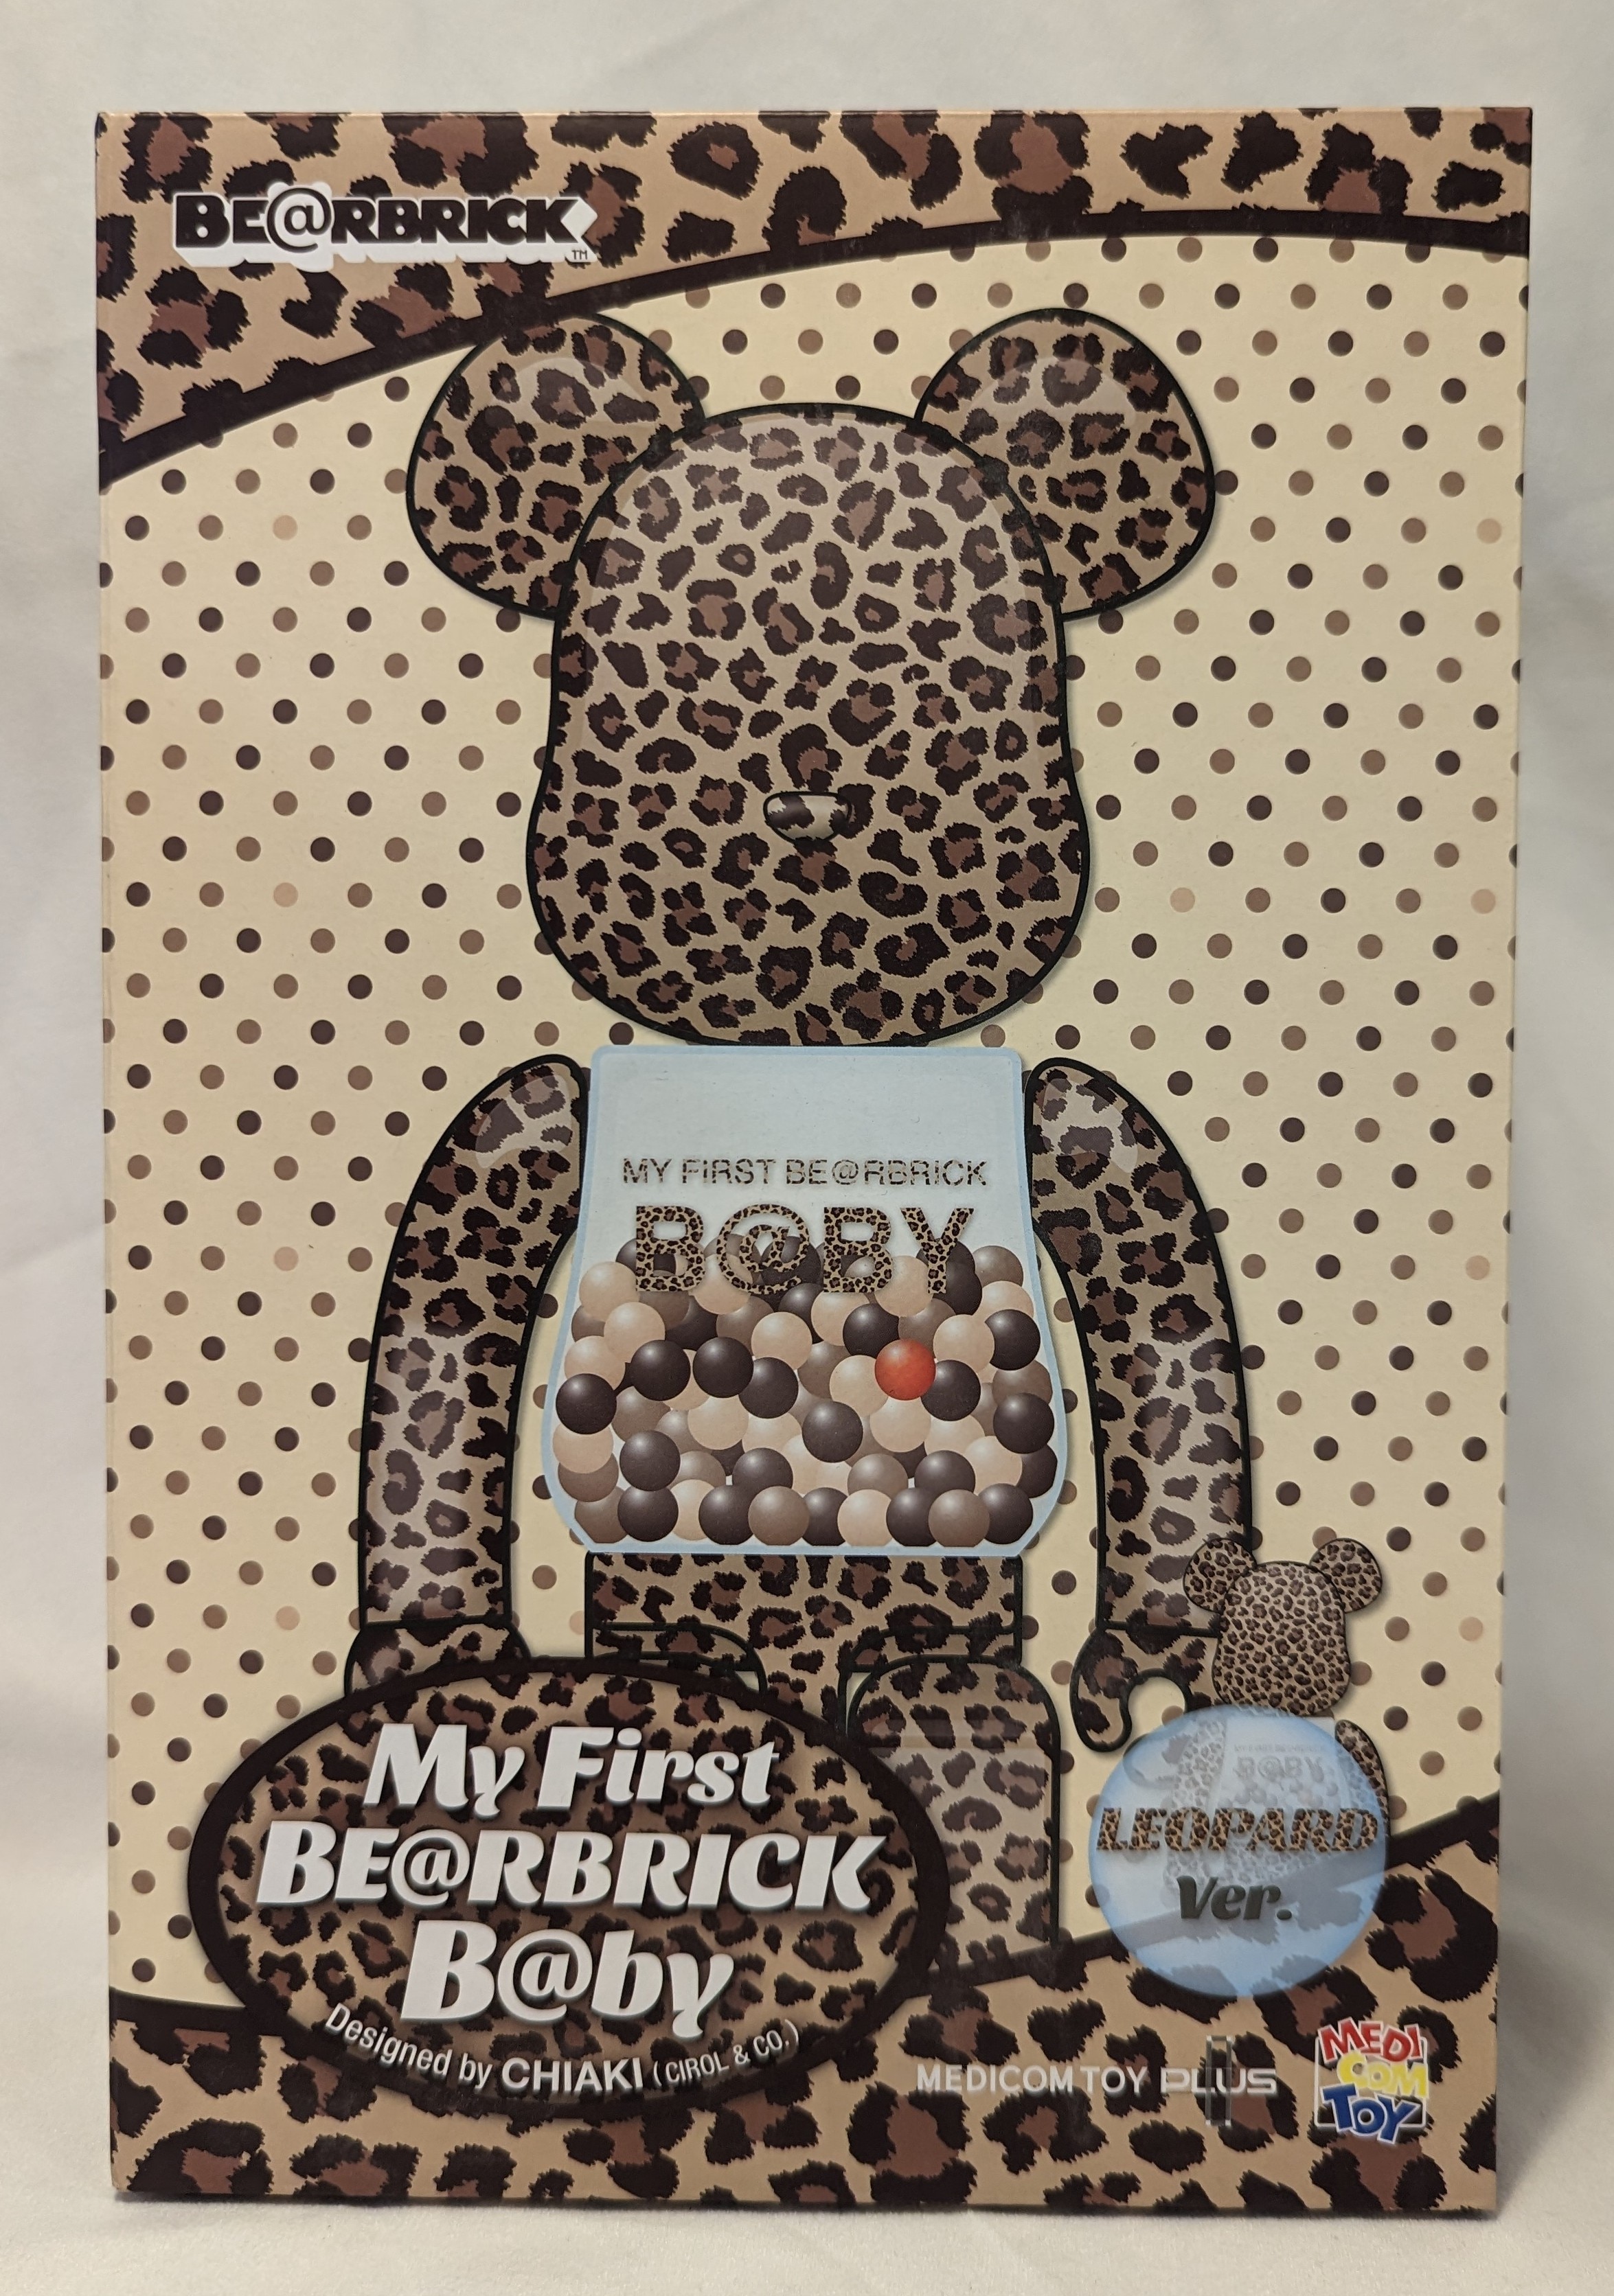 MEDICOMTOY BE@RBRICK MY FIRST BE@RBRICK Baby (B@by) LEOPARD Ver ...